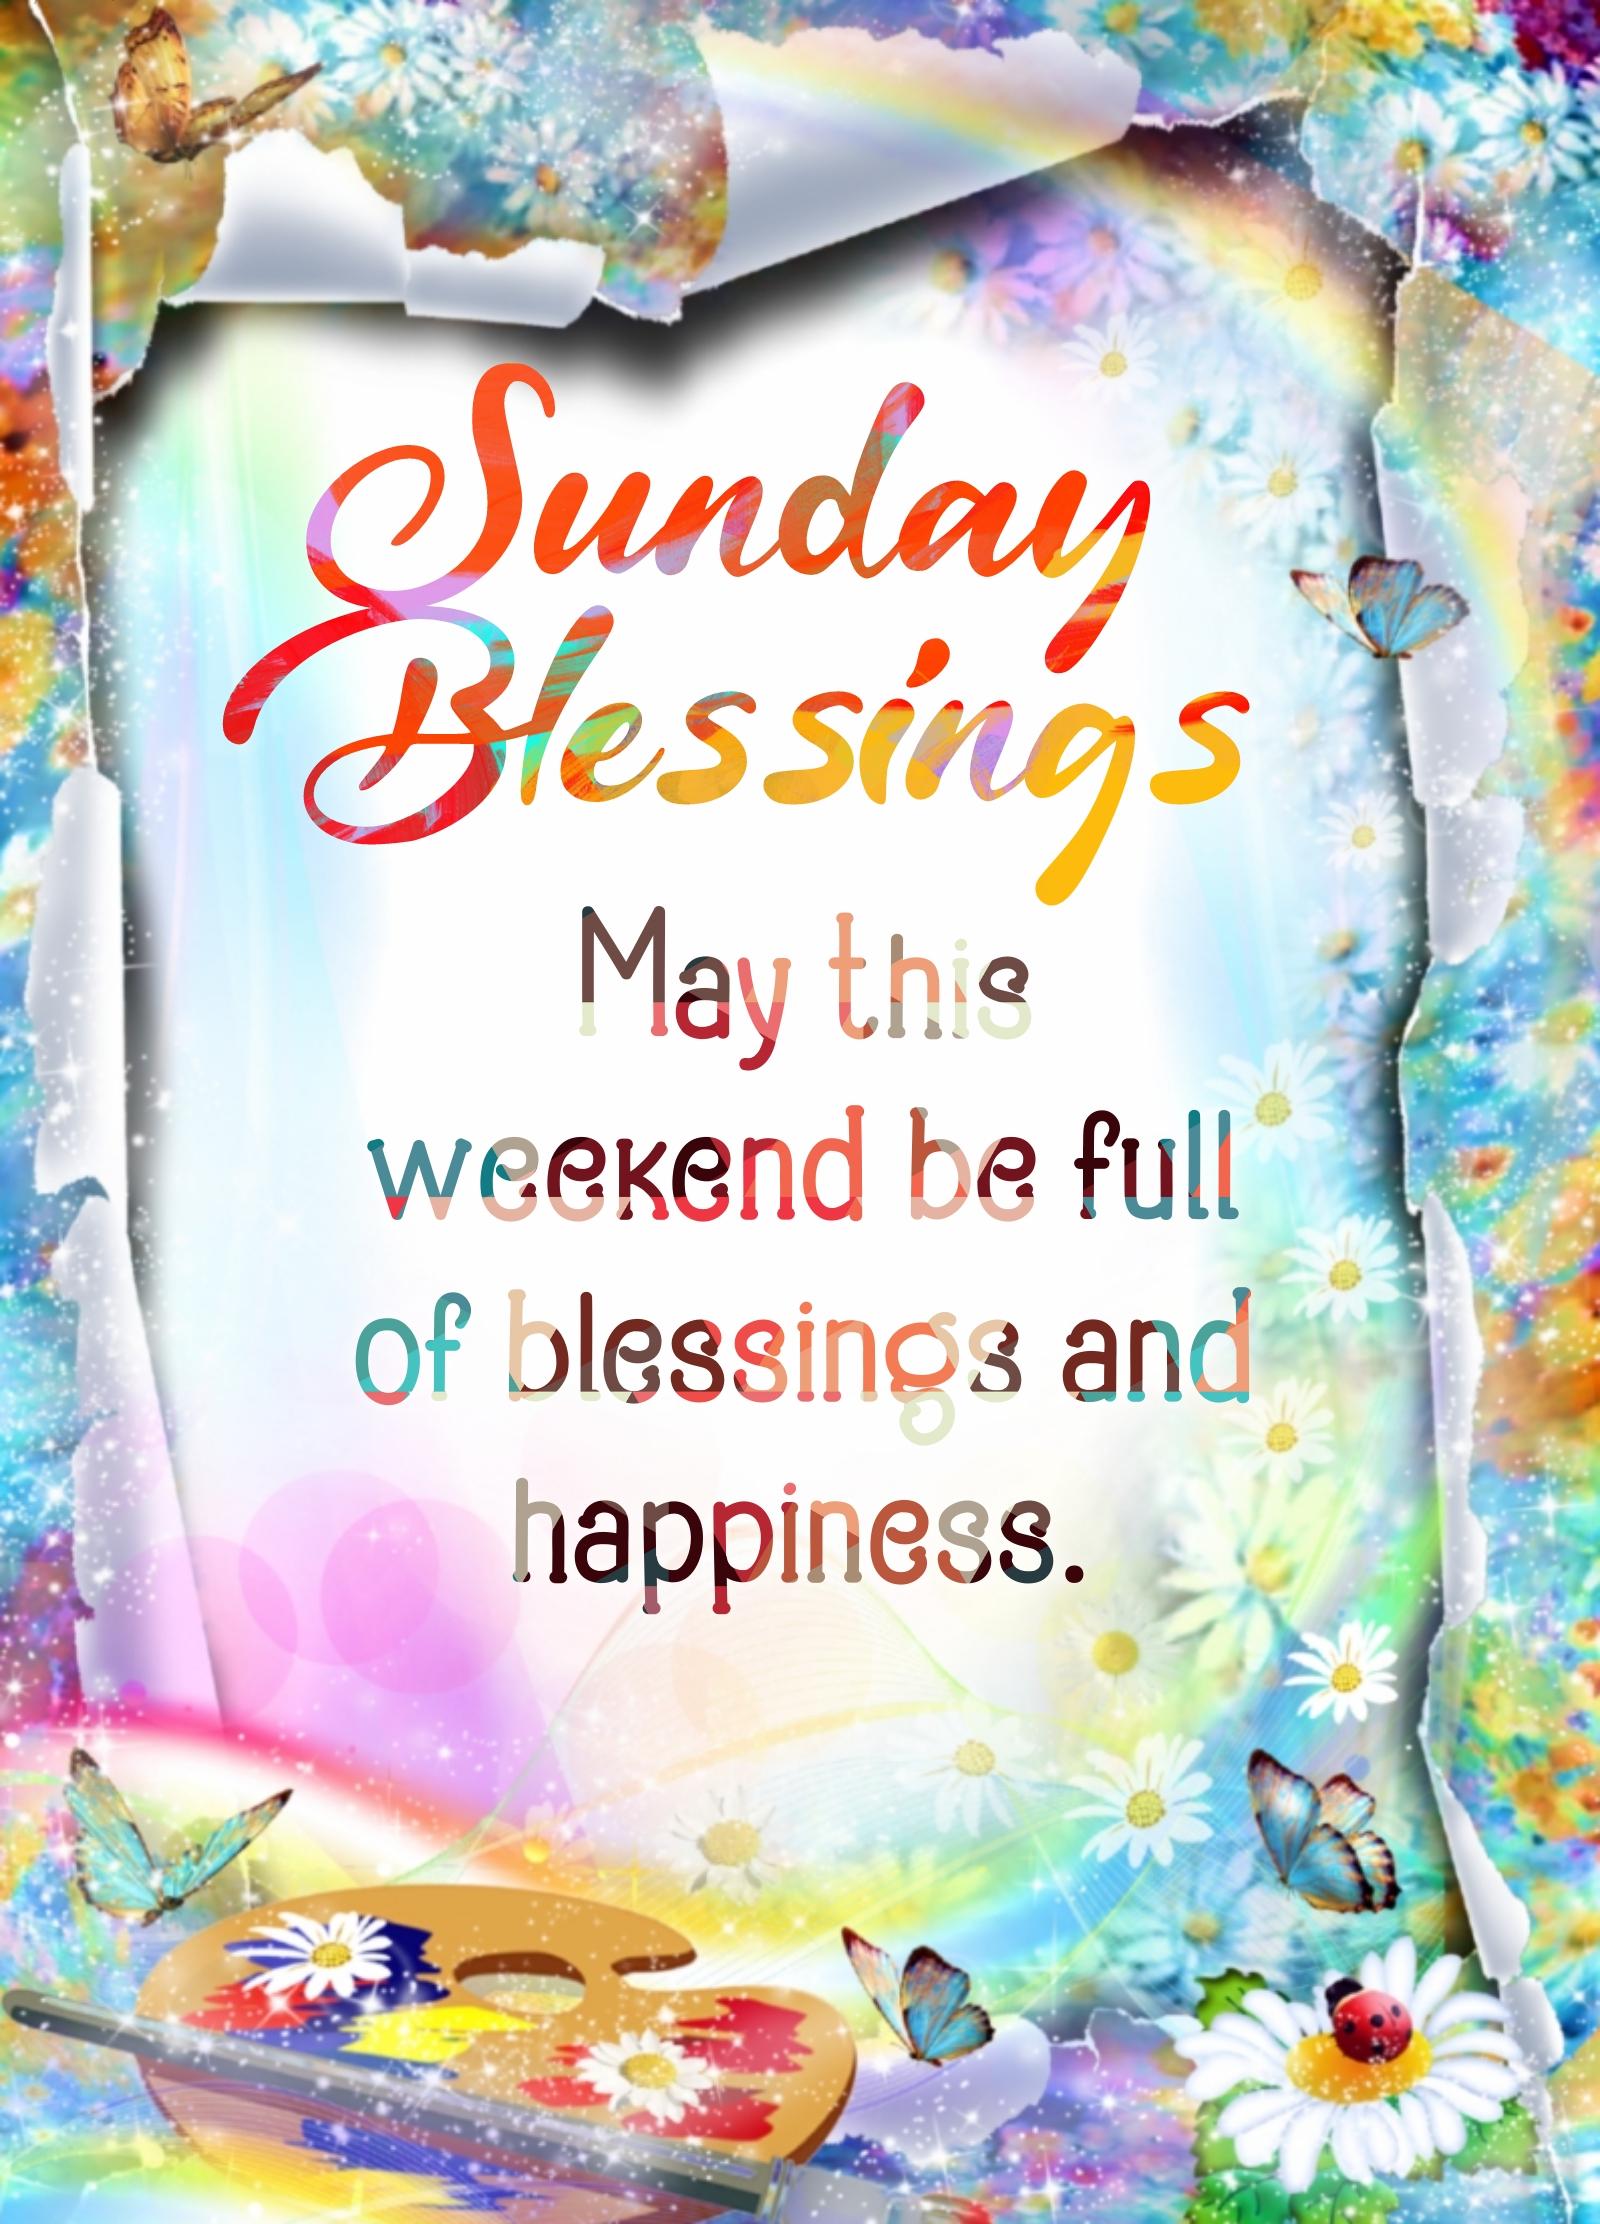 May this weekend be full of blessings and happiness